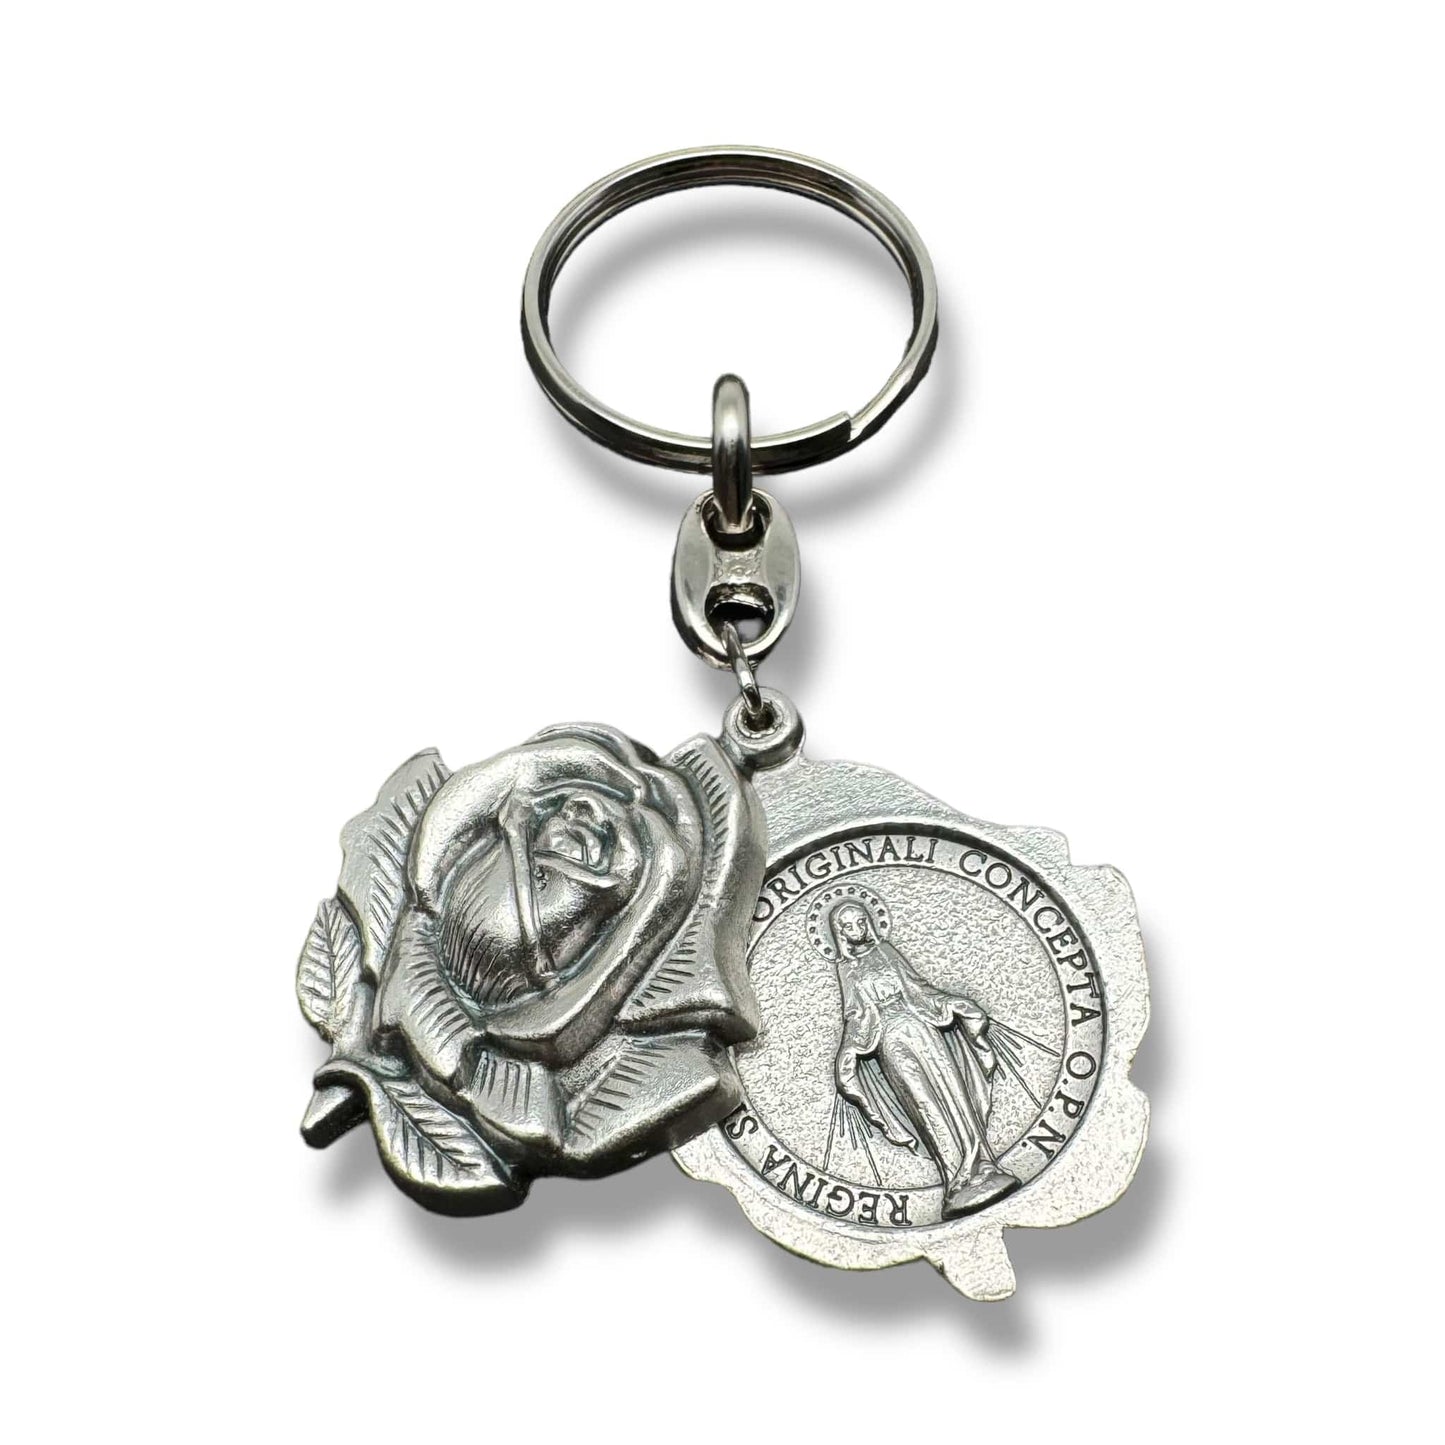 Catholically Keyring Miraculous Medal Key Fob | Key Ring | Exorcism | Key Chain Blessed By Pope